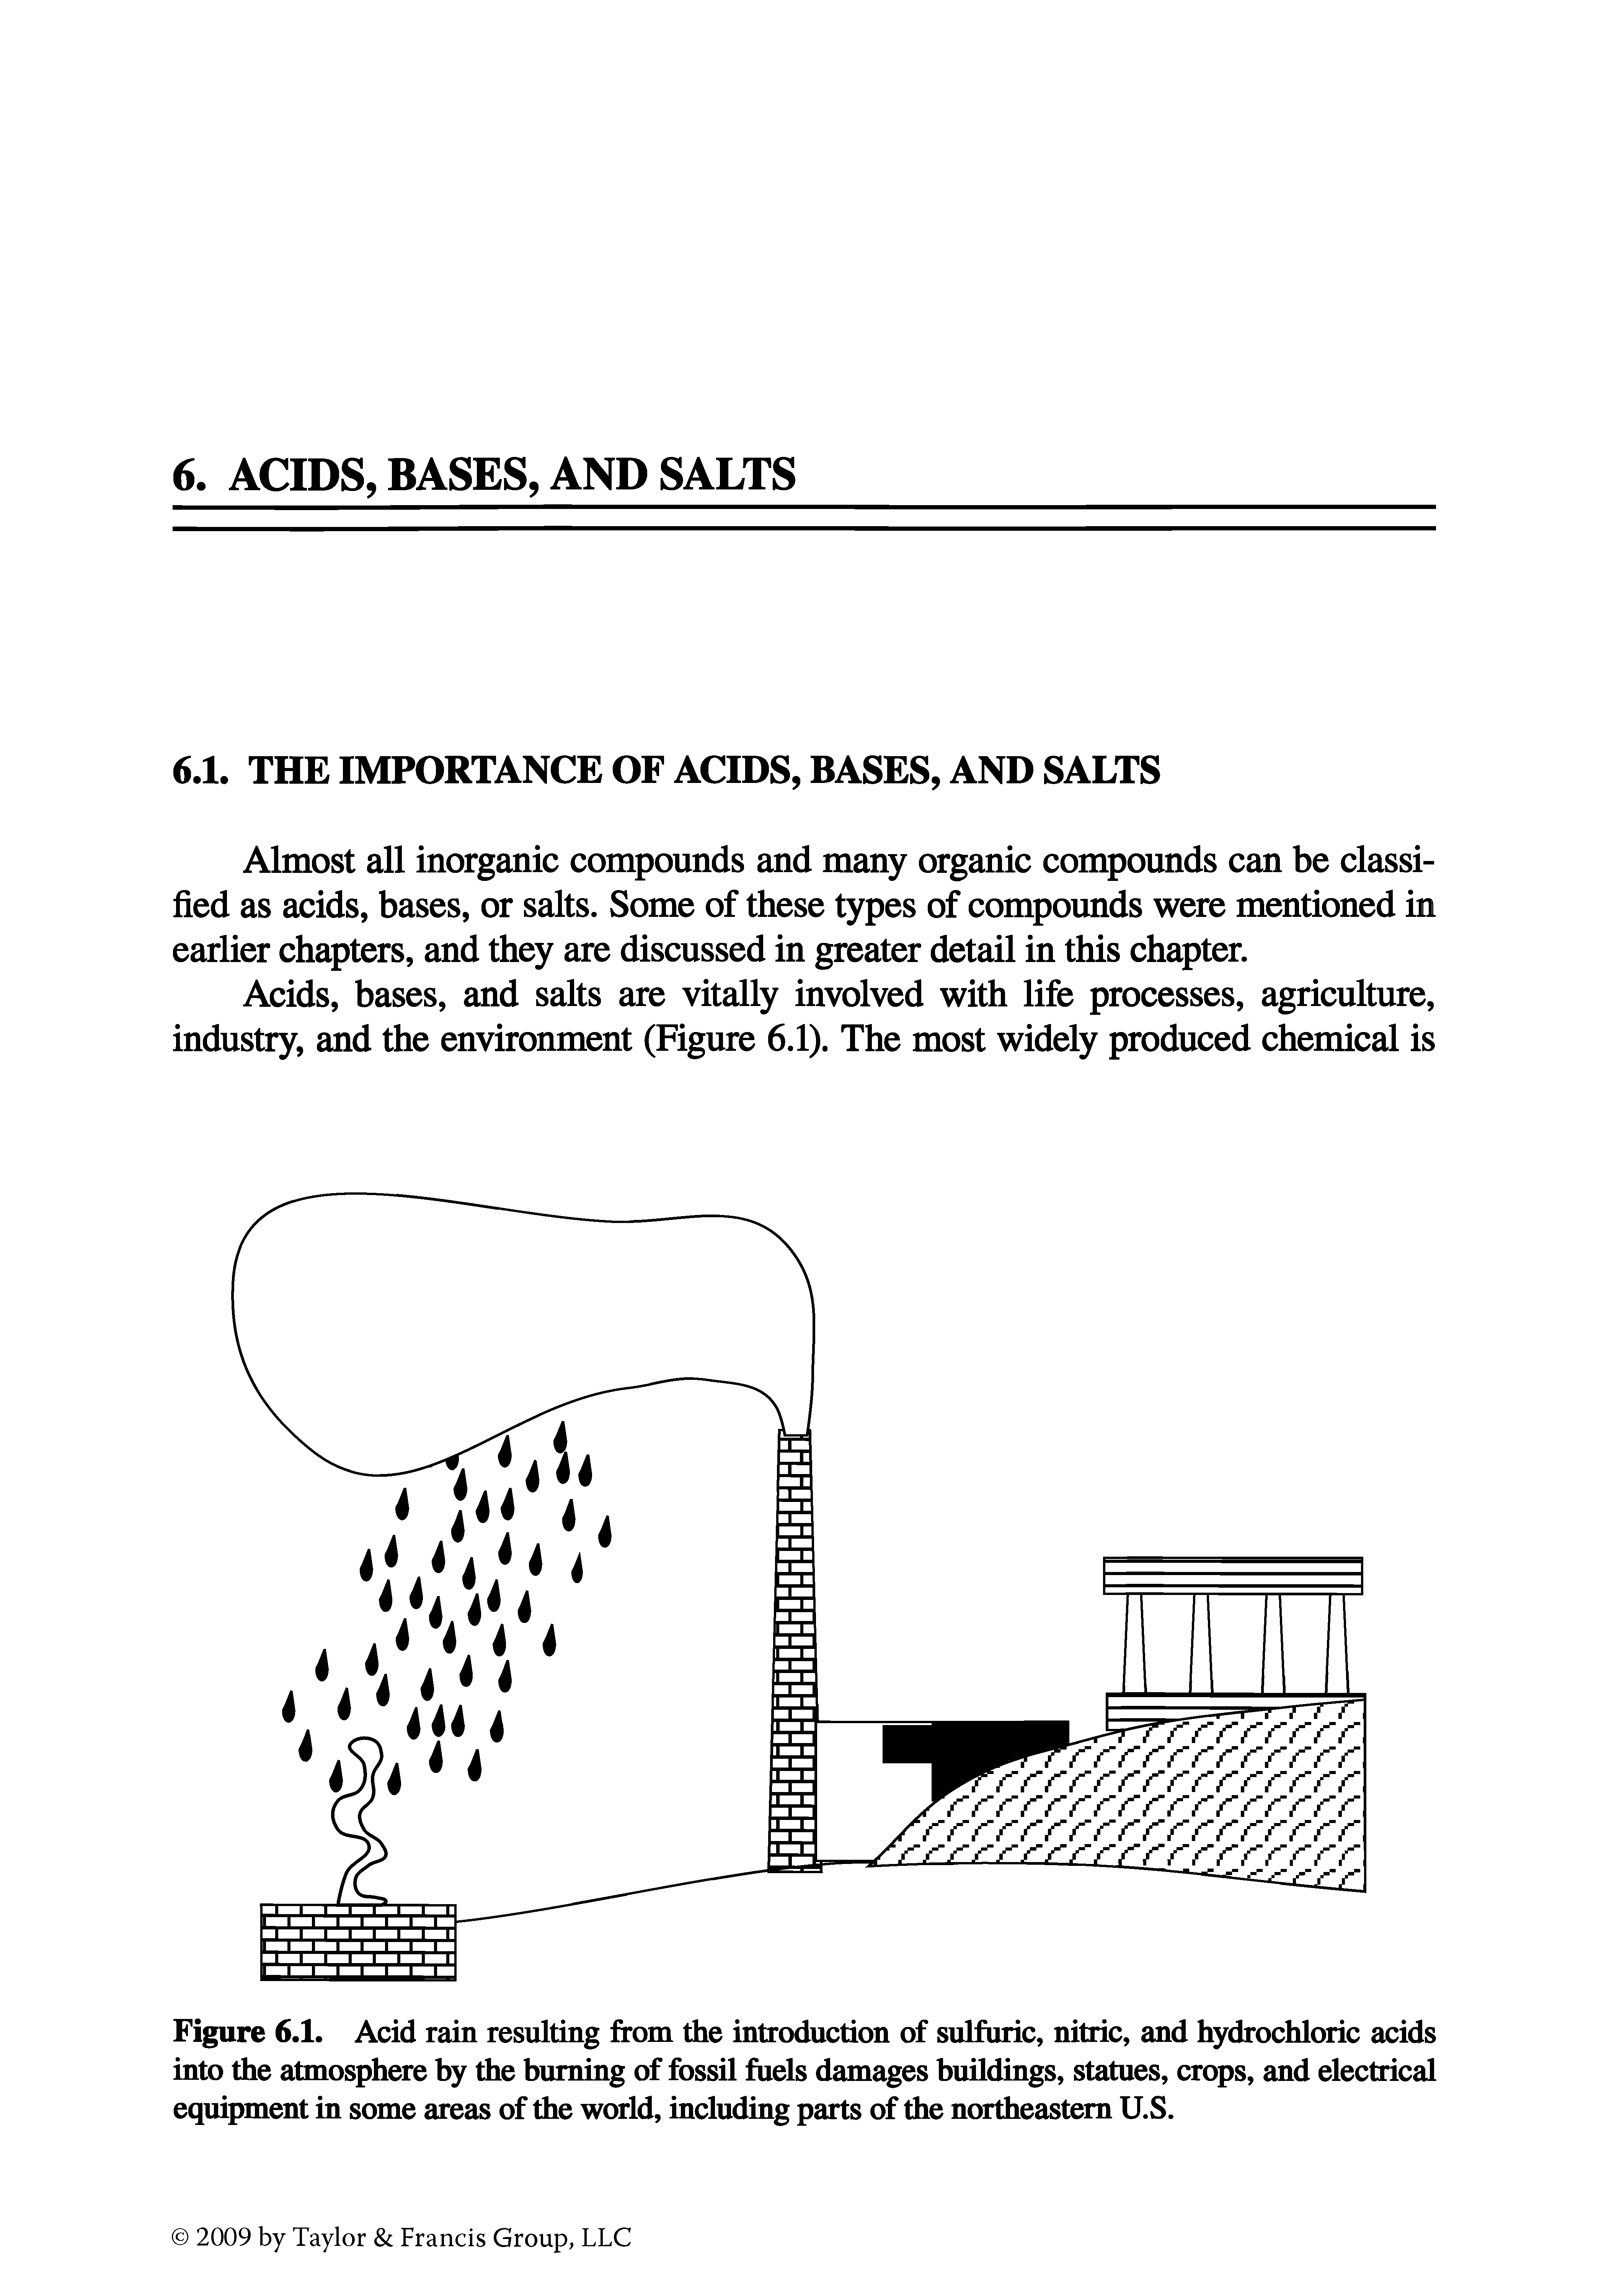 Figure 6.1. Acid rain resulting from the introduction of sulfuric, nitric, and hydrochloric acids into the atmosphere by the burning of fossil fuels damages buildings, statues, crops, and electrical equipment in some areas of the world, including parts of the northeastern U.S.